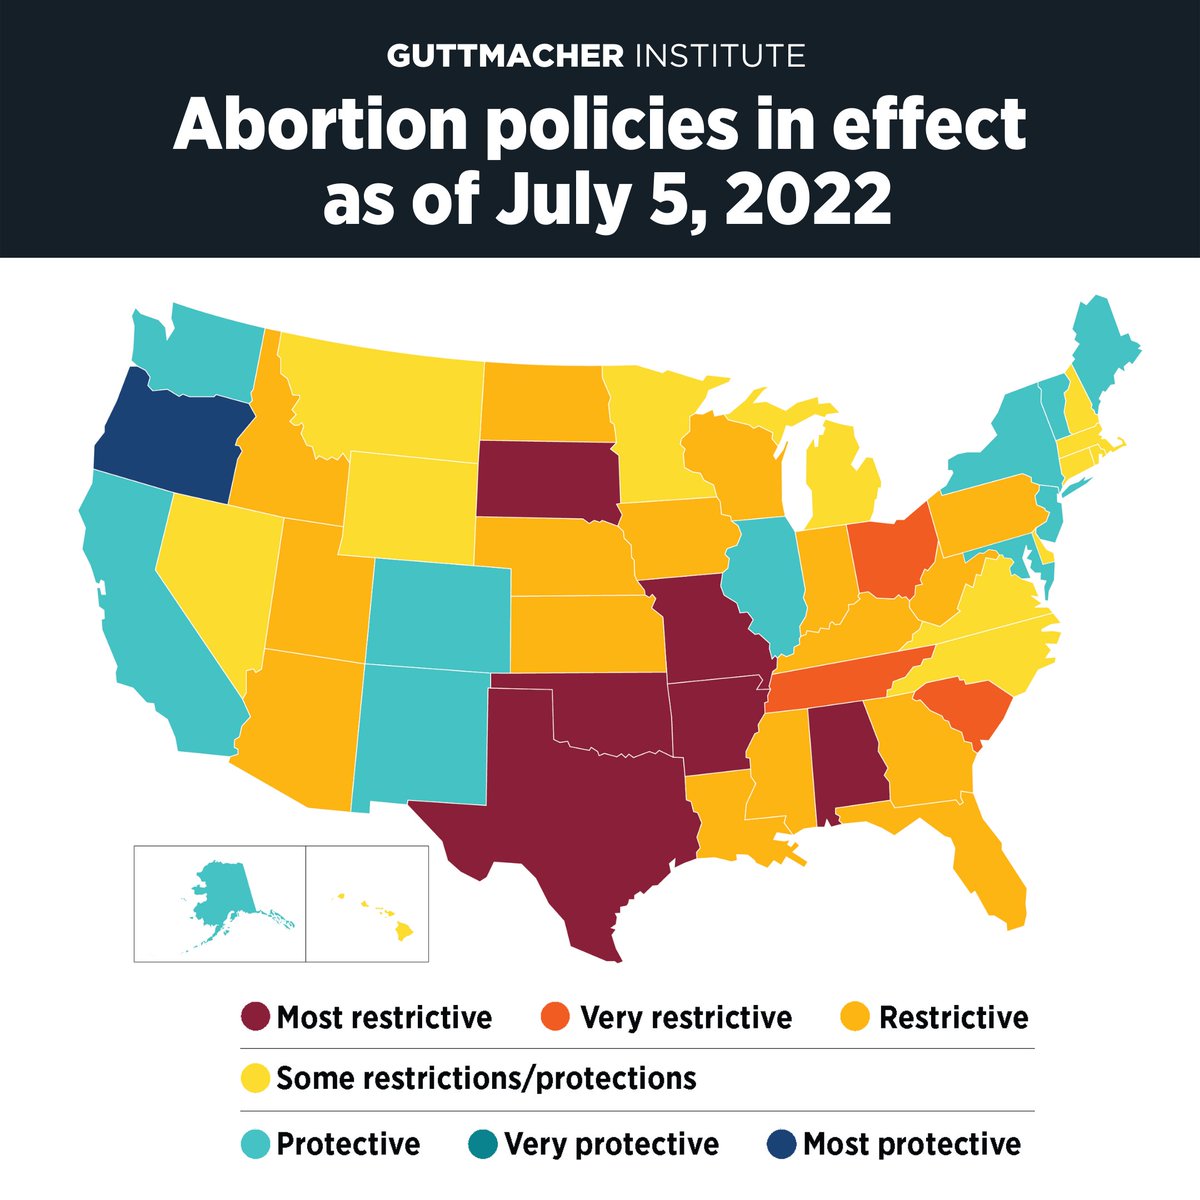 Policy update: Texas' total abortion ban & Florida's 15-week ban are in effect, while Maryland has moved to the protective category on our interactive map after enacting 2 new measures to expand abortion access. Latest updates: states.guttmacher.org/policies/ #BansOffOurBodies #RoeVWade